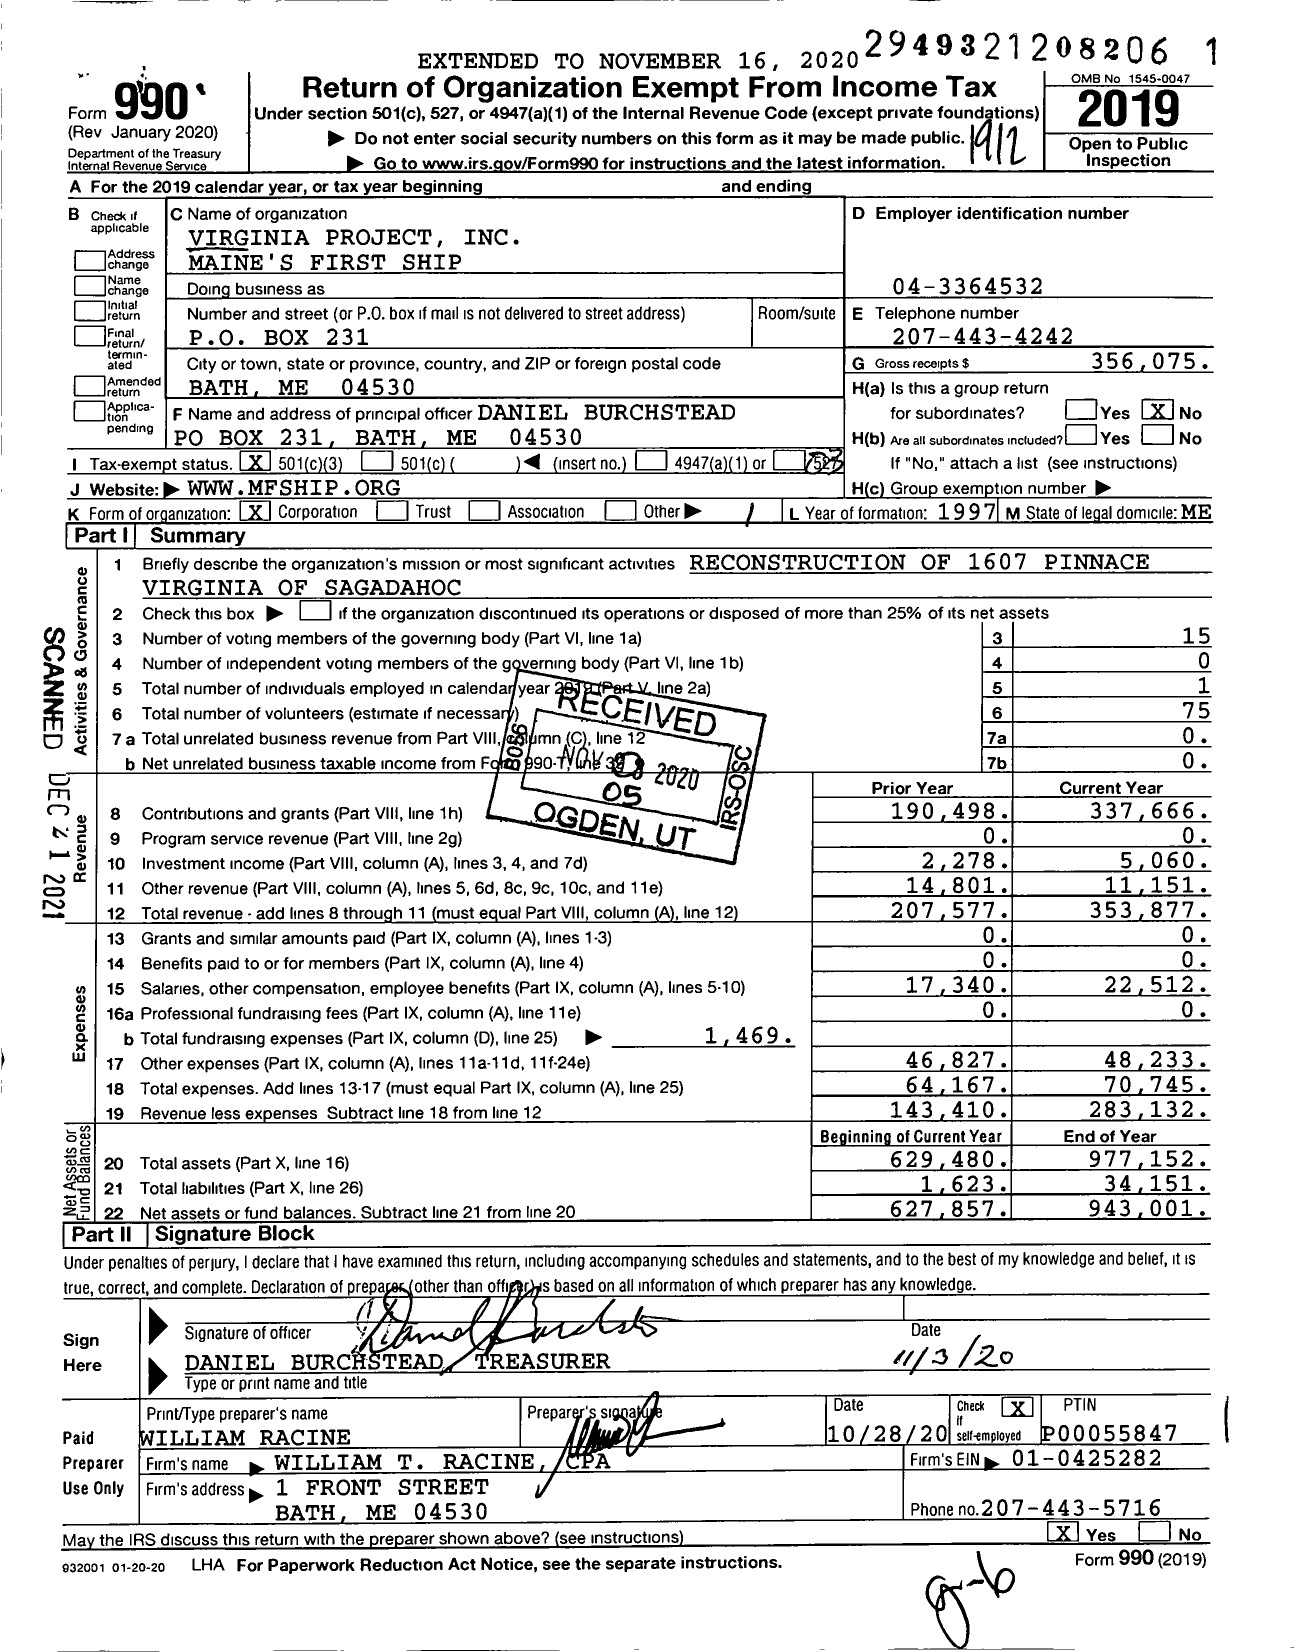 Image of first page of 2019 Form 990 for Virginia Project Maine's First Ship